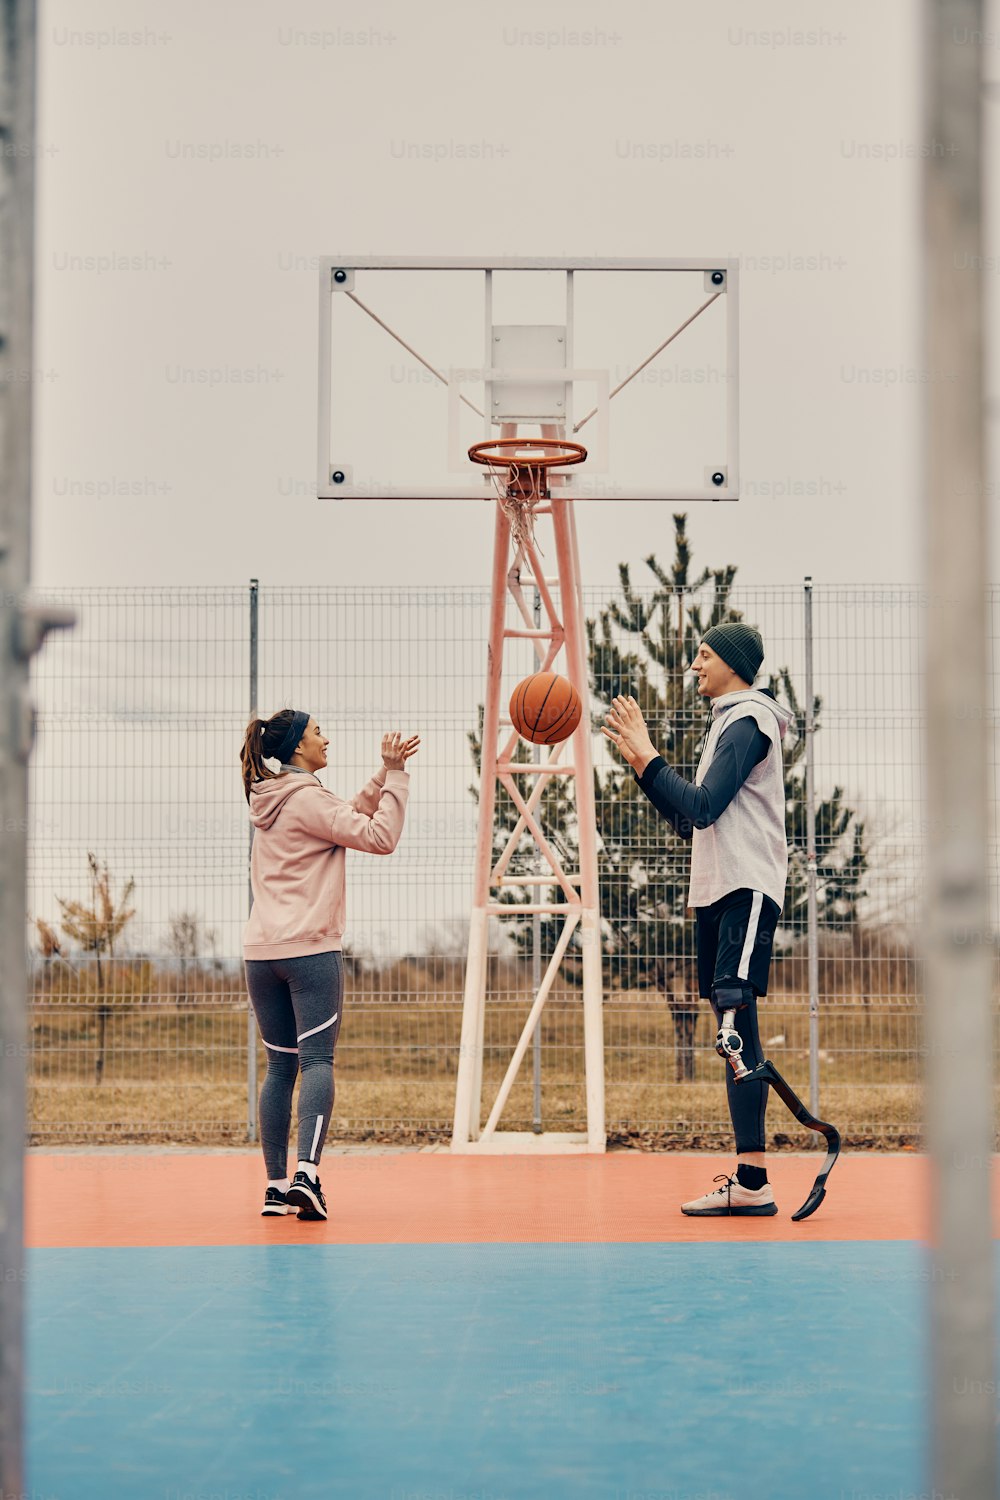 Full length of athletic woman and her male friend with leg prosthesis playing basketball on outdoors sports court.